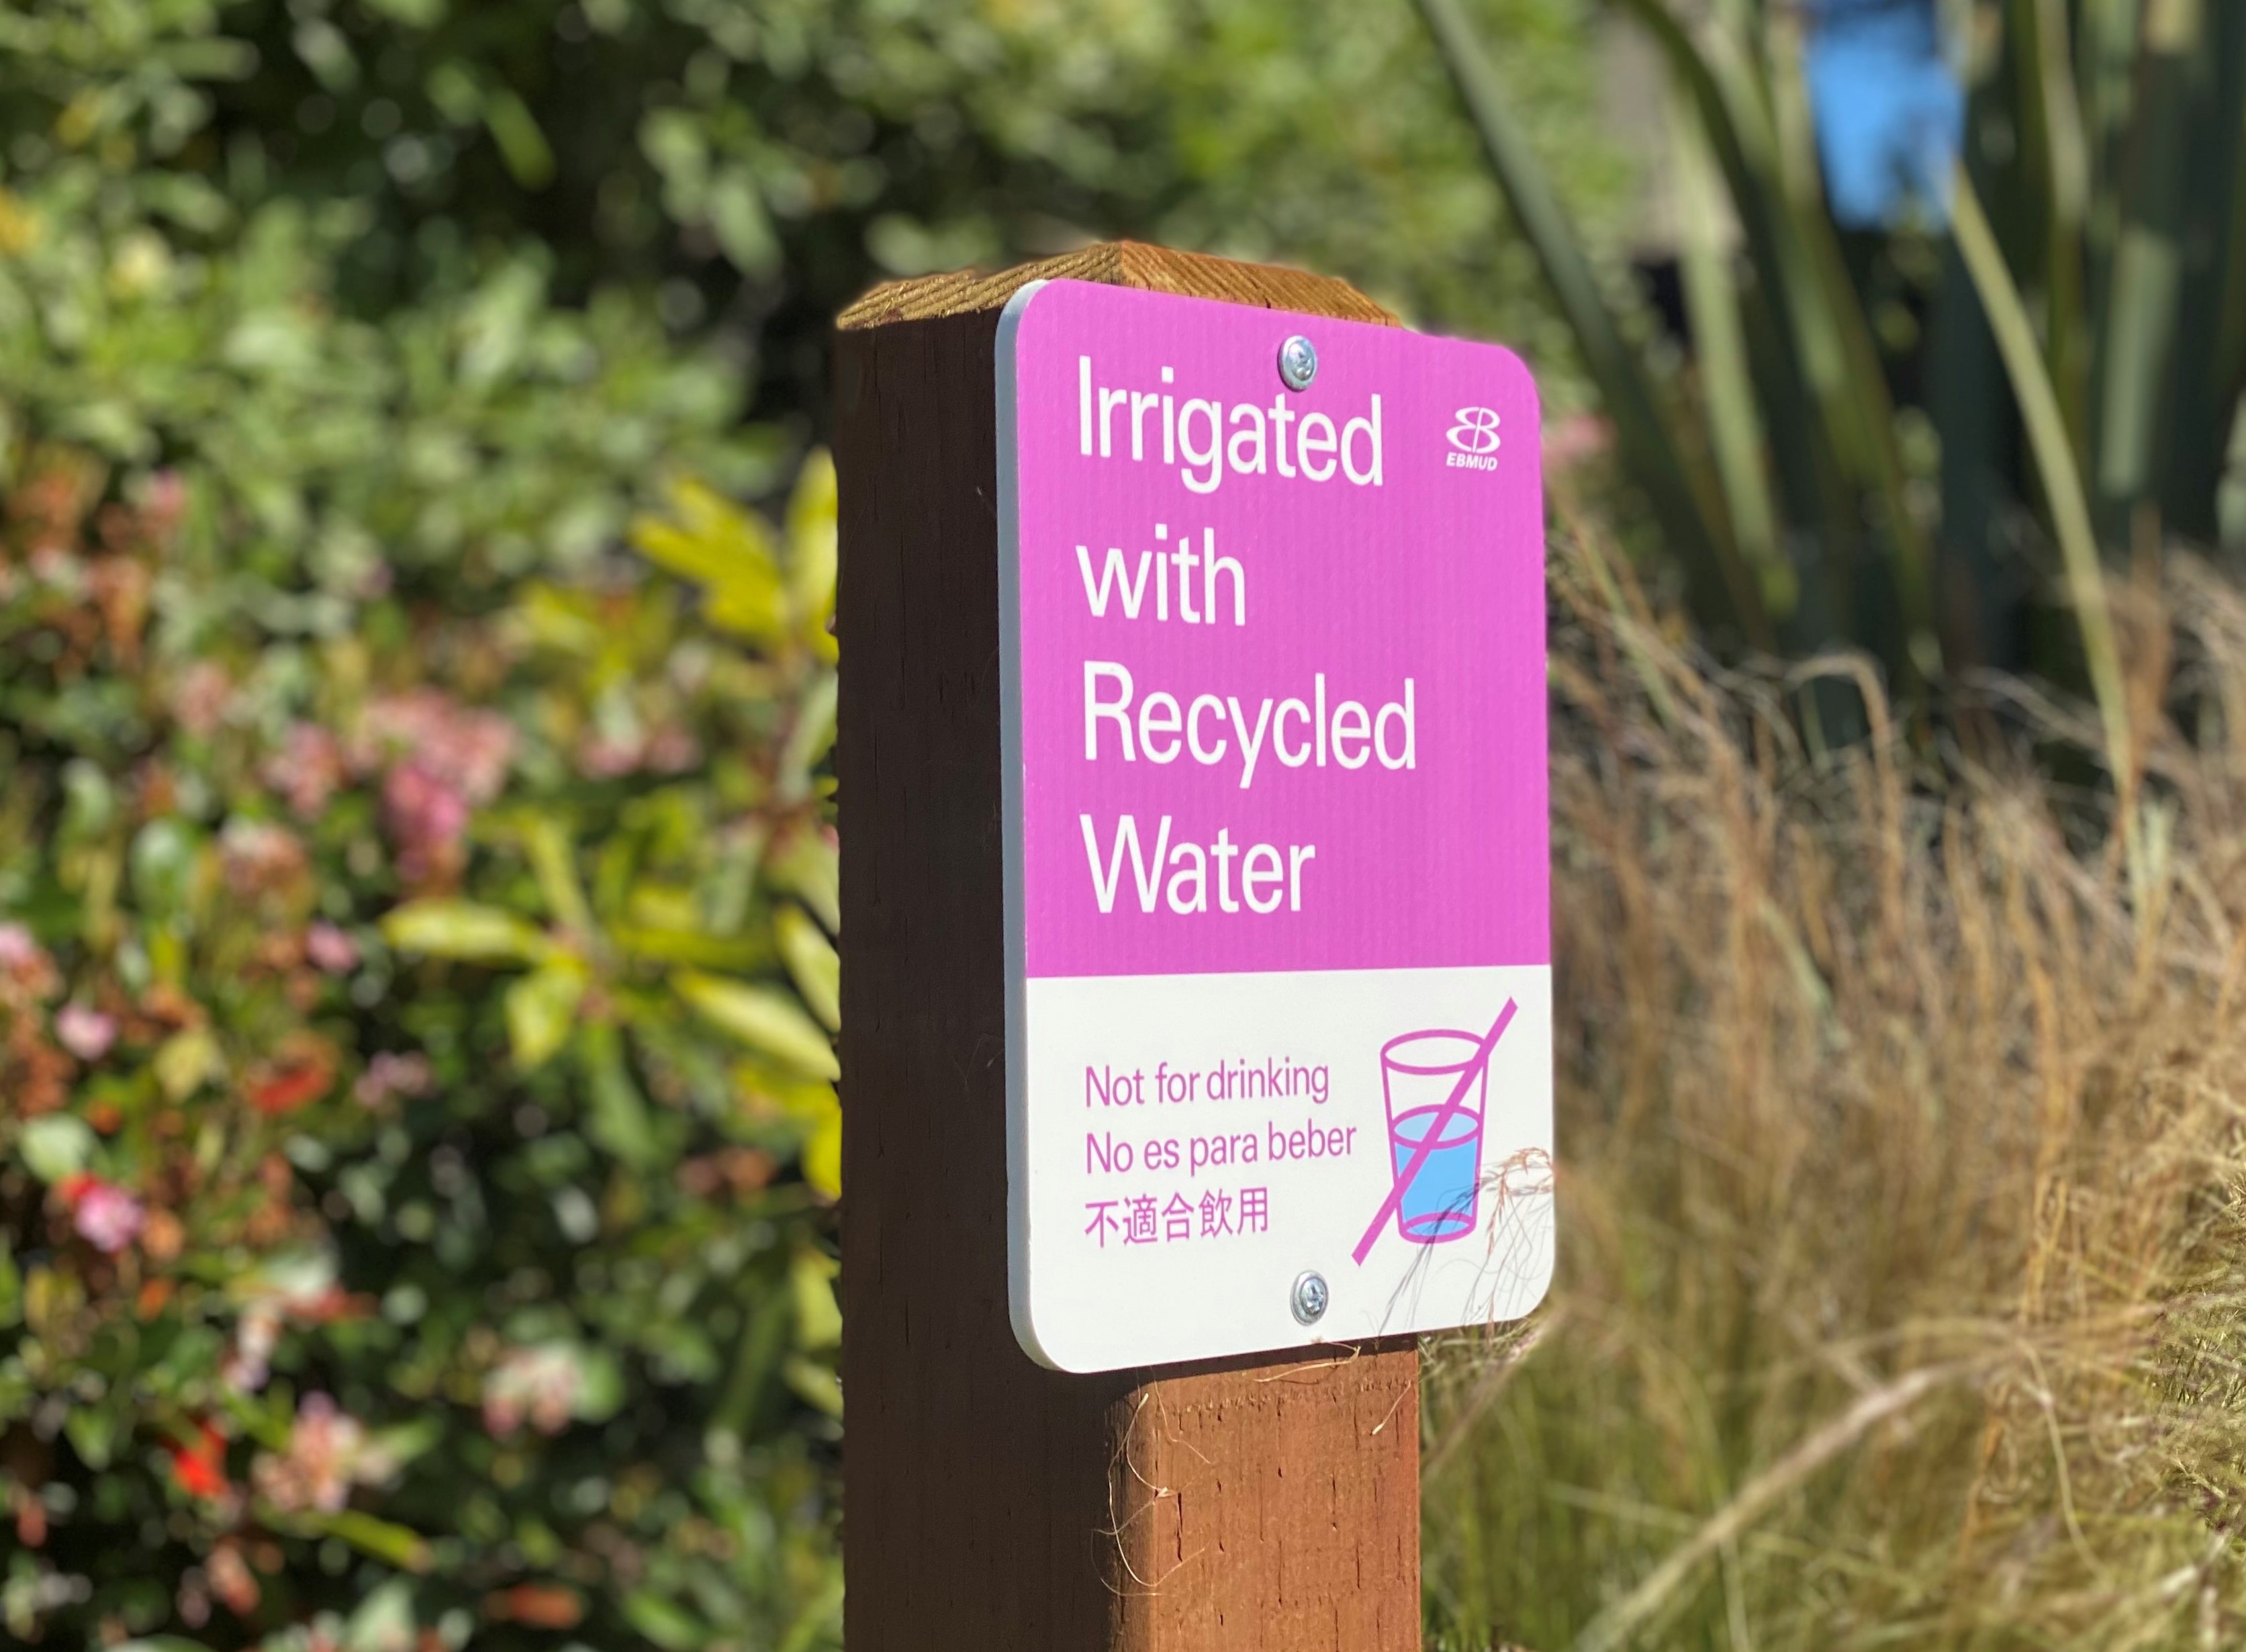 Using recycled water for landscape irrigation eases the demand for potable water